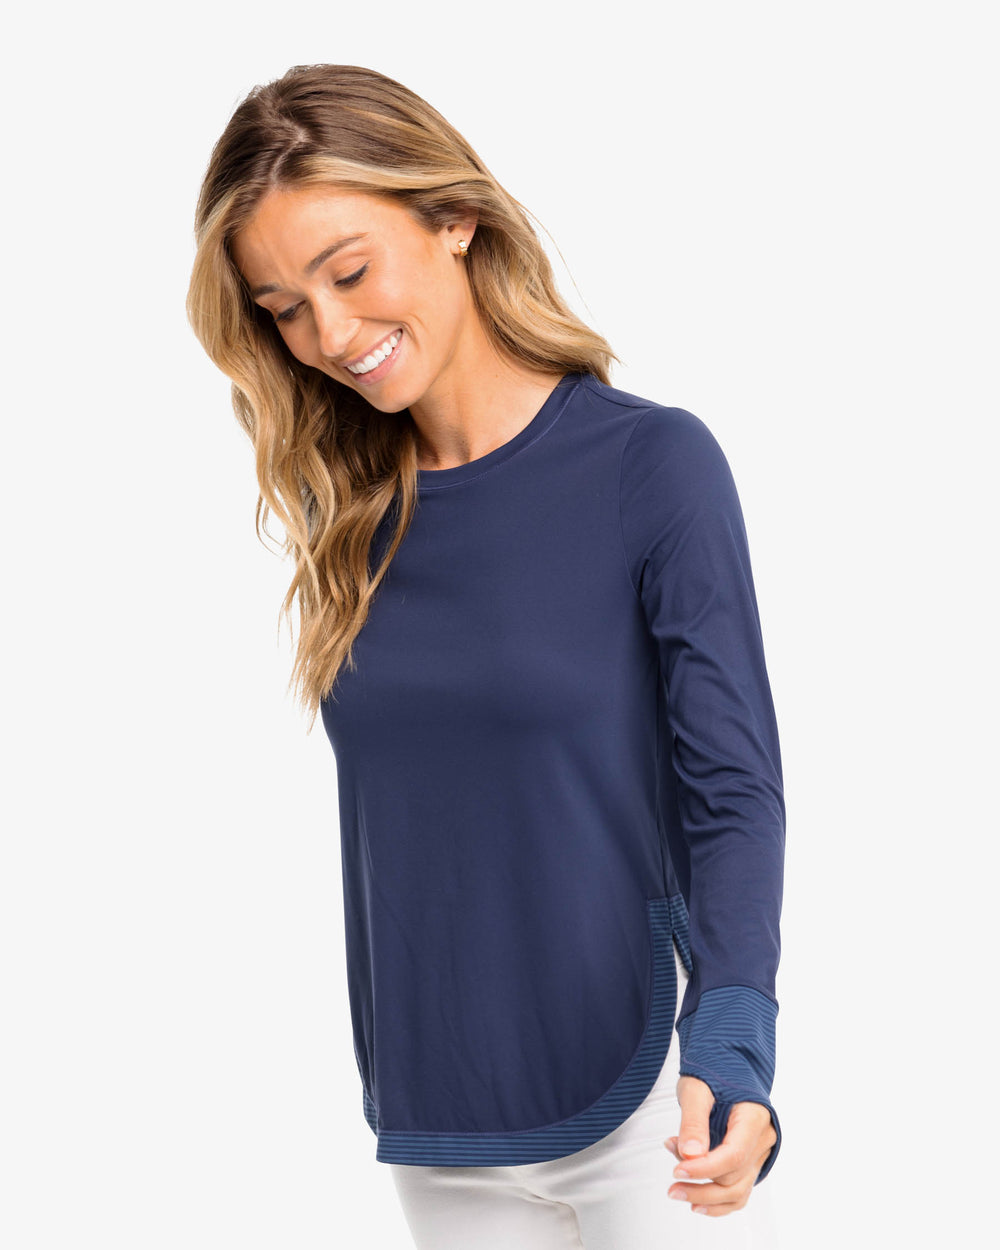 The front view of the Demy Long Sleeve Performance Top by Southern Tide - Nautical Navy